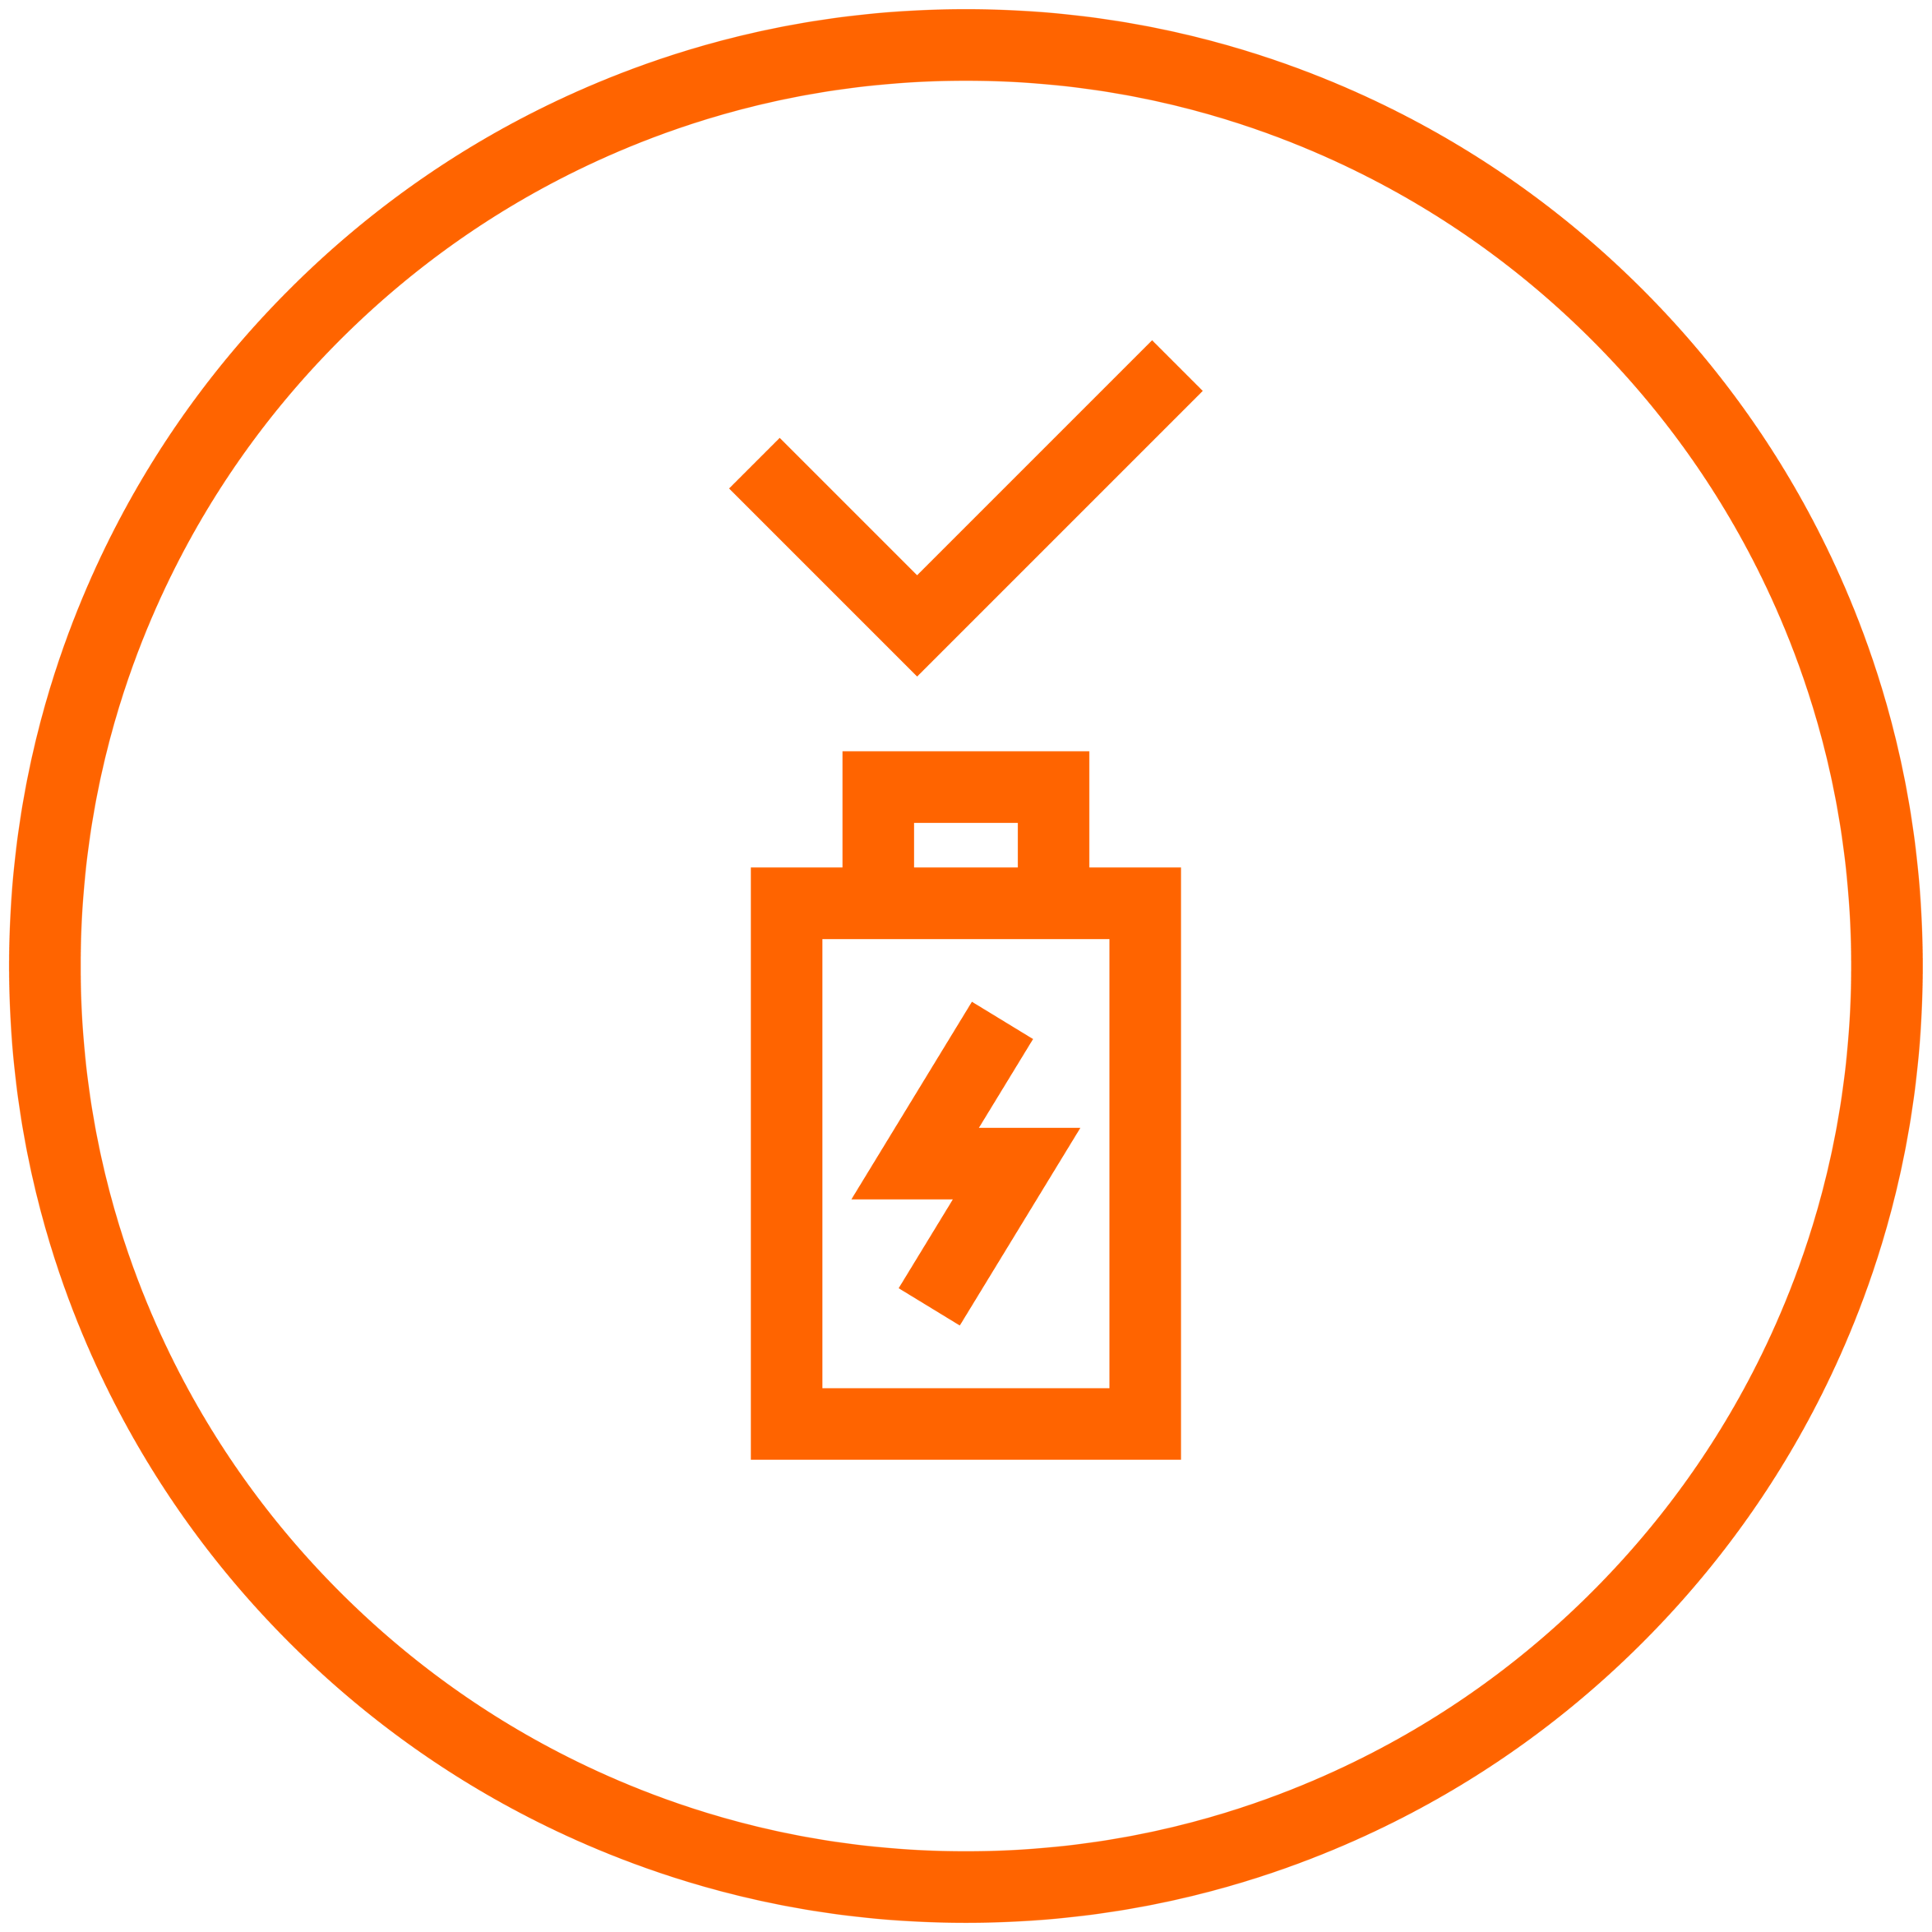 icon of charged batter. kempower supports charging power